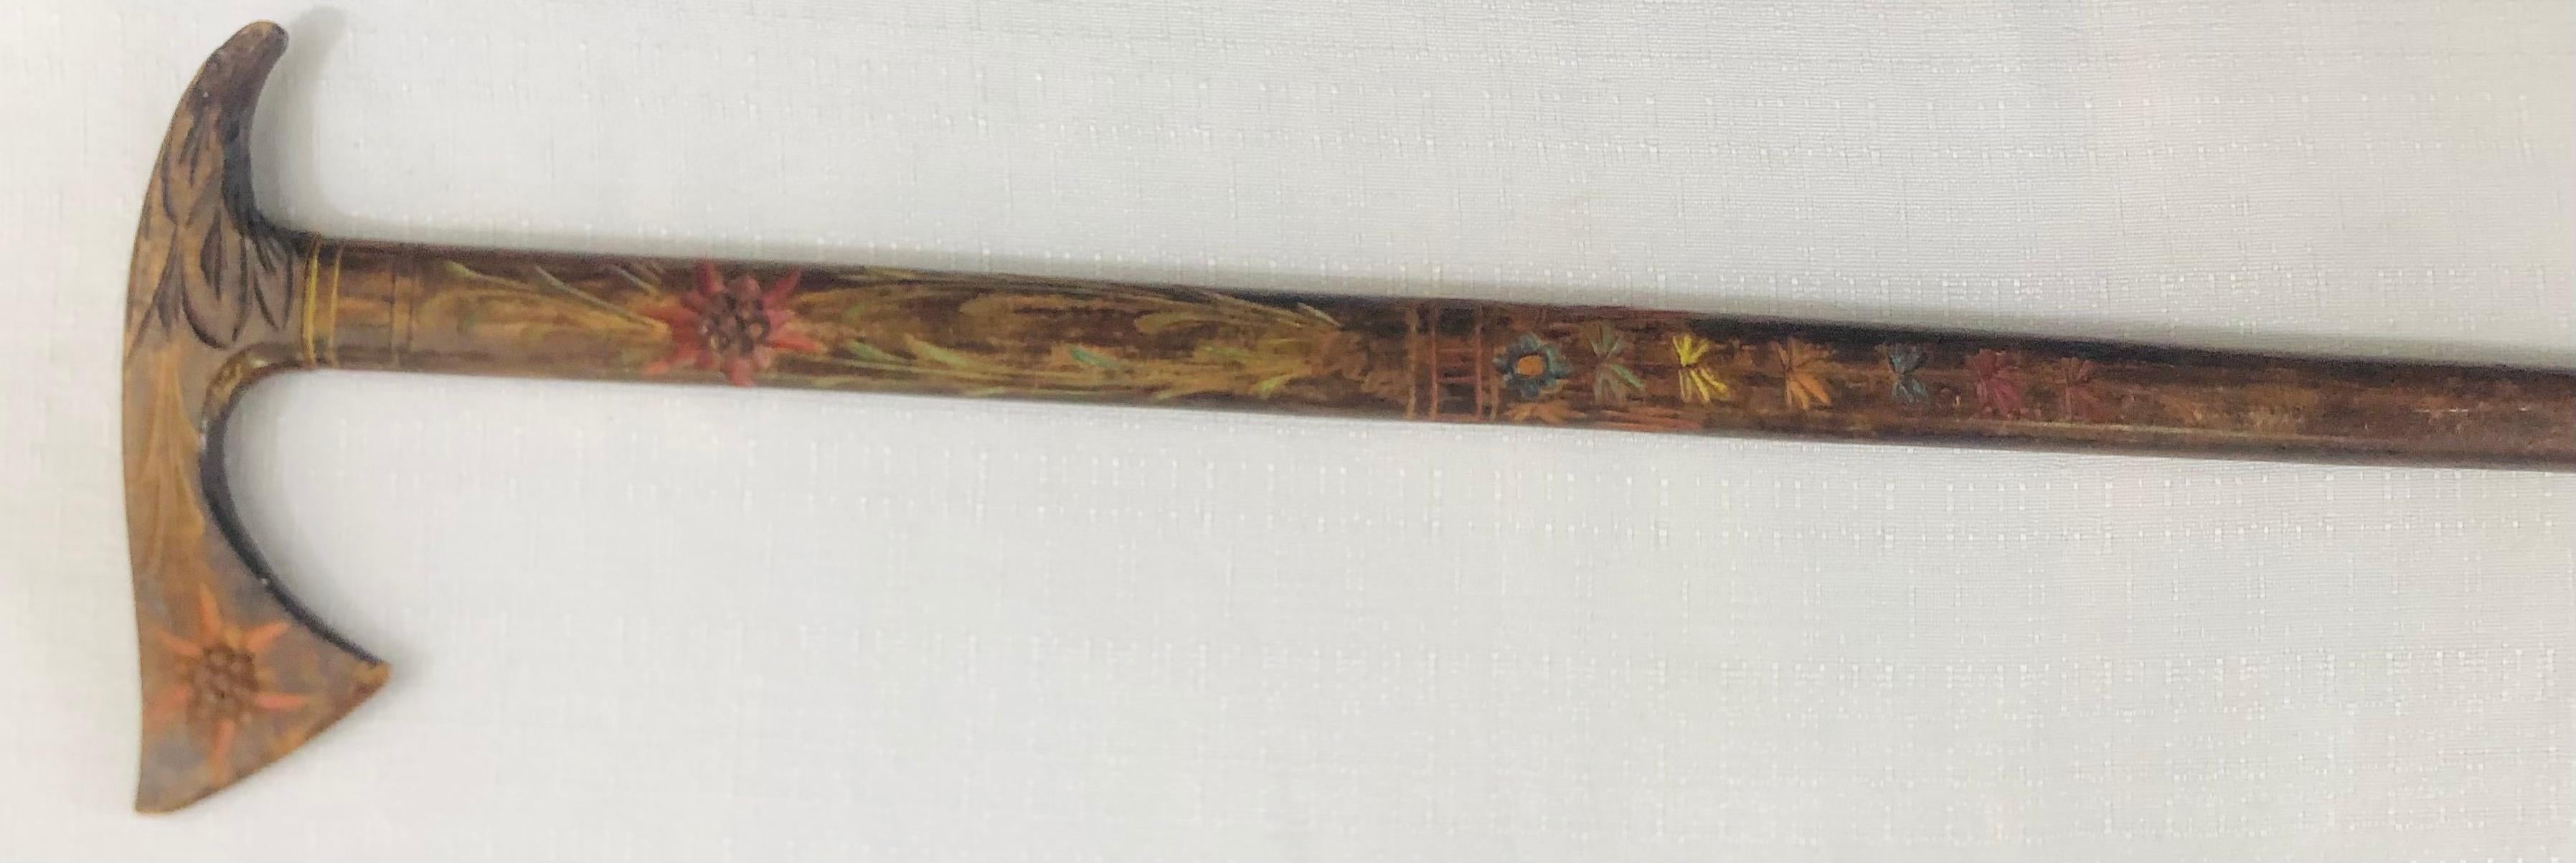 An early 20th century hand carved wood men's cane. The cane features beautiful hand carving of flowers painted in multiple colors. The name of what it seems to be the original owner is carved on the handle. 

Measures: 37